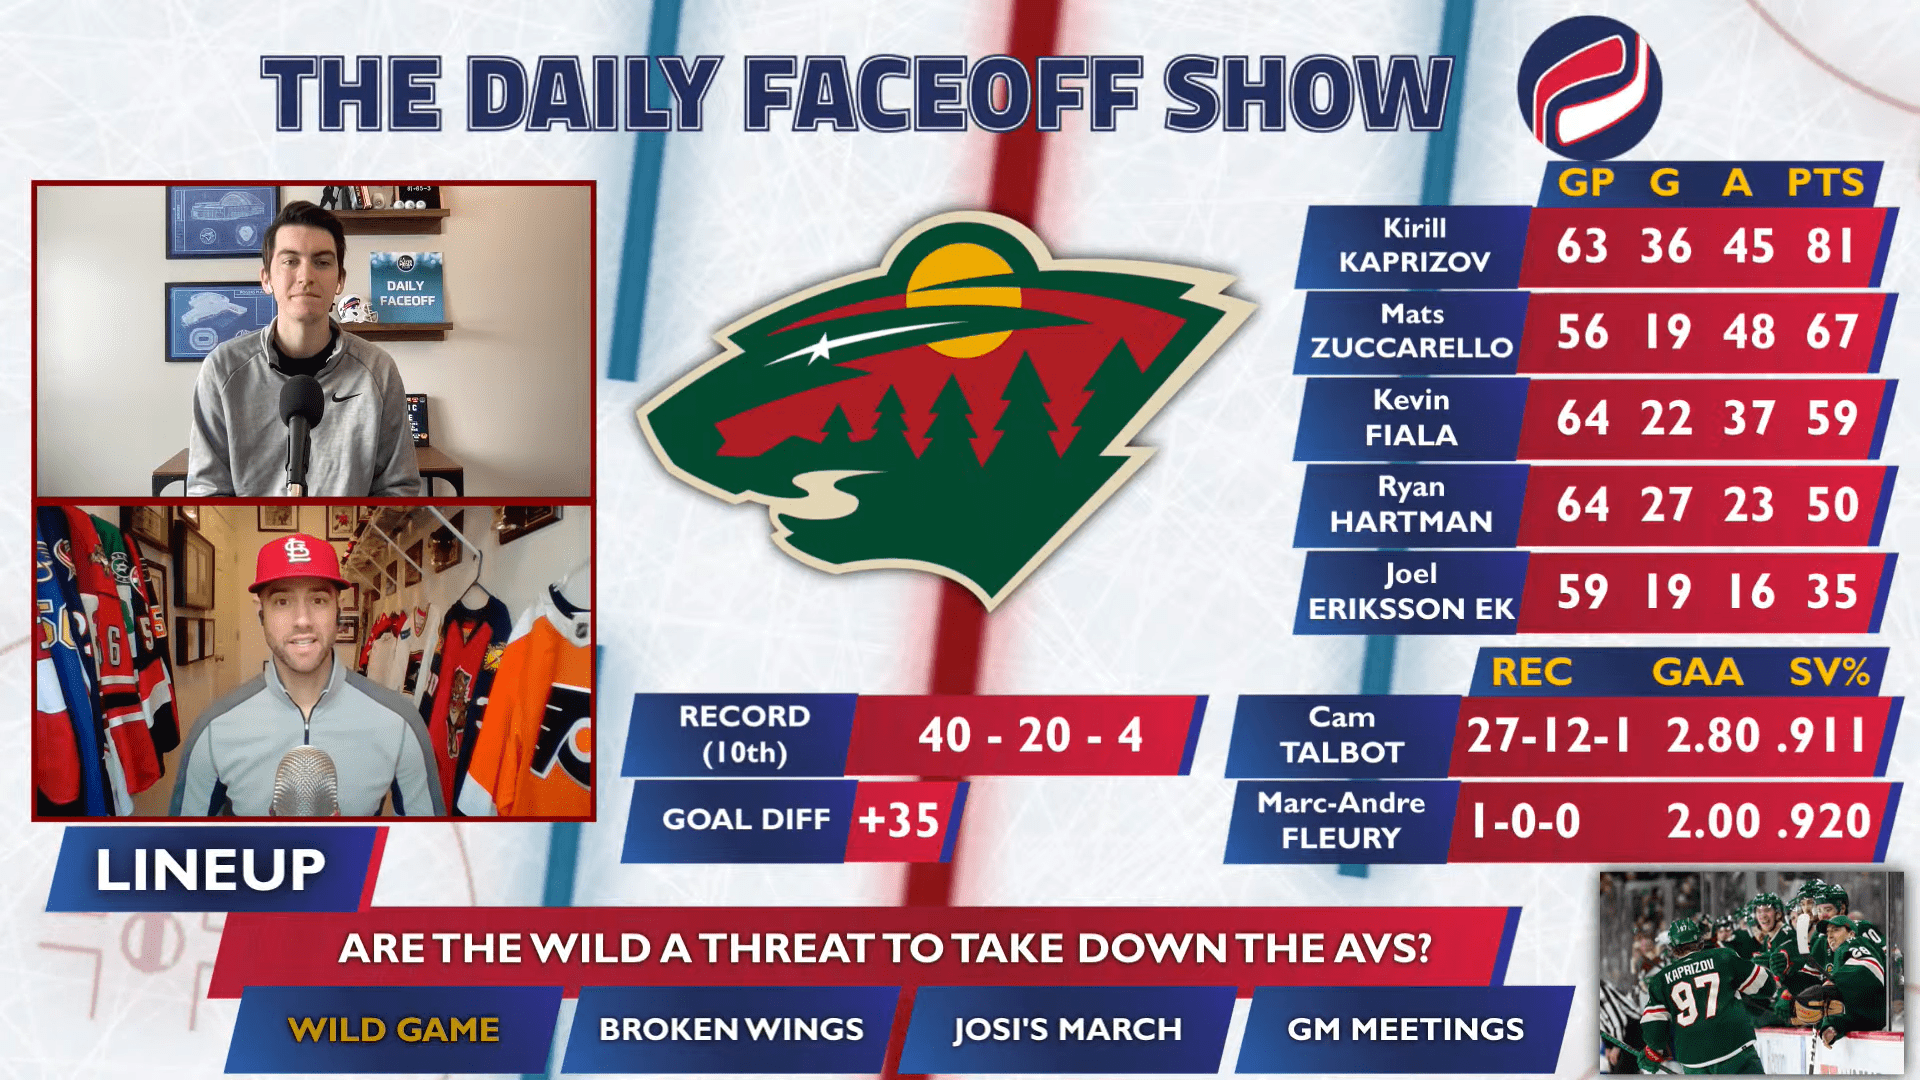 The Daily Faceoff Show: Can the Minnesota Wild compete with the Colorado Avalanche in the playoffs?